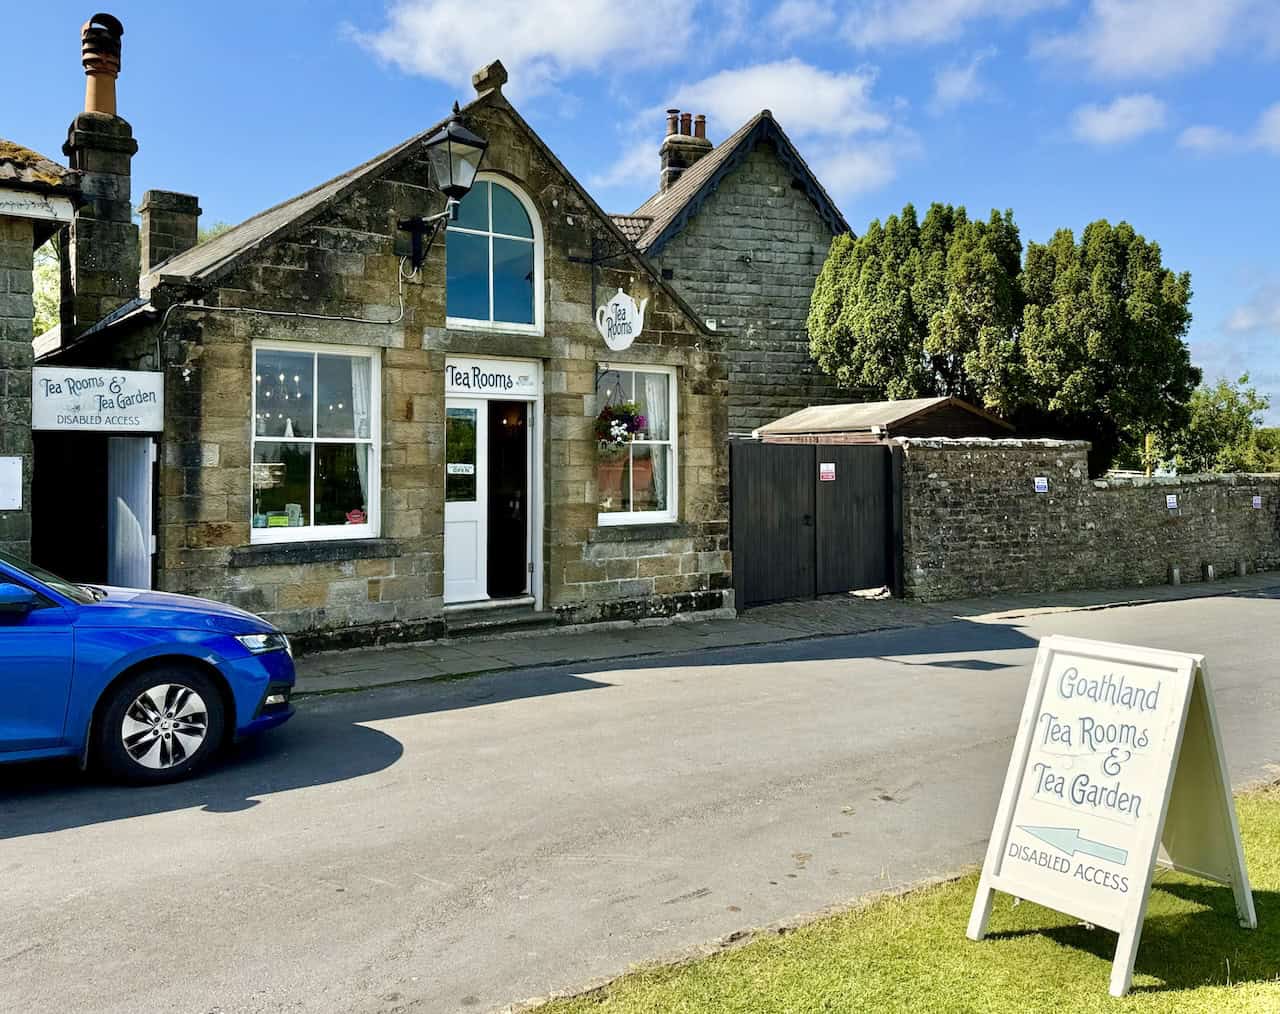 Goathland Tea Rooms & Tea Garden, offering a selection of teas and homemade treats. The tea garden provides a pleasant outdoor space for relaxation during or at the end of the Goathland walk.
